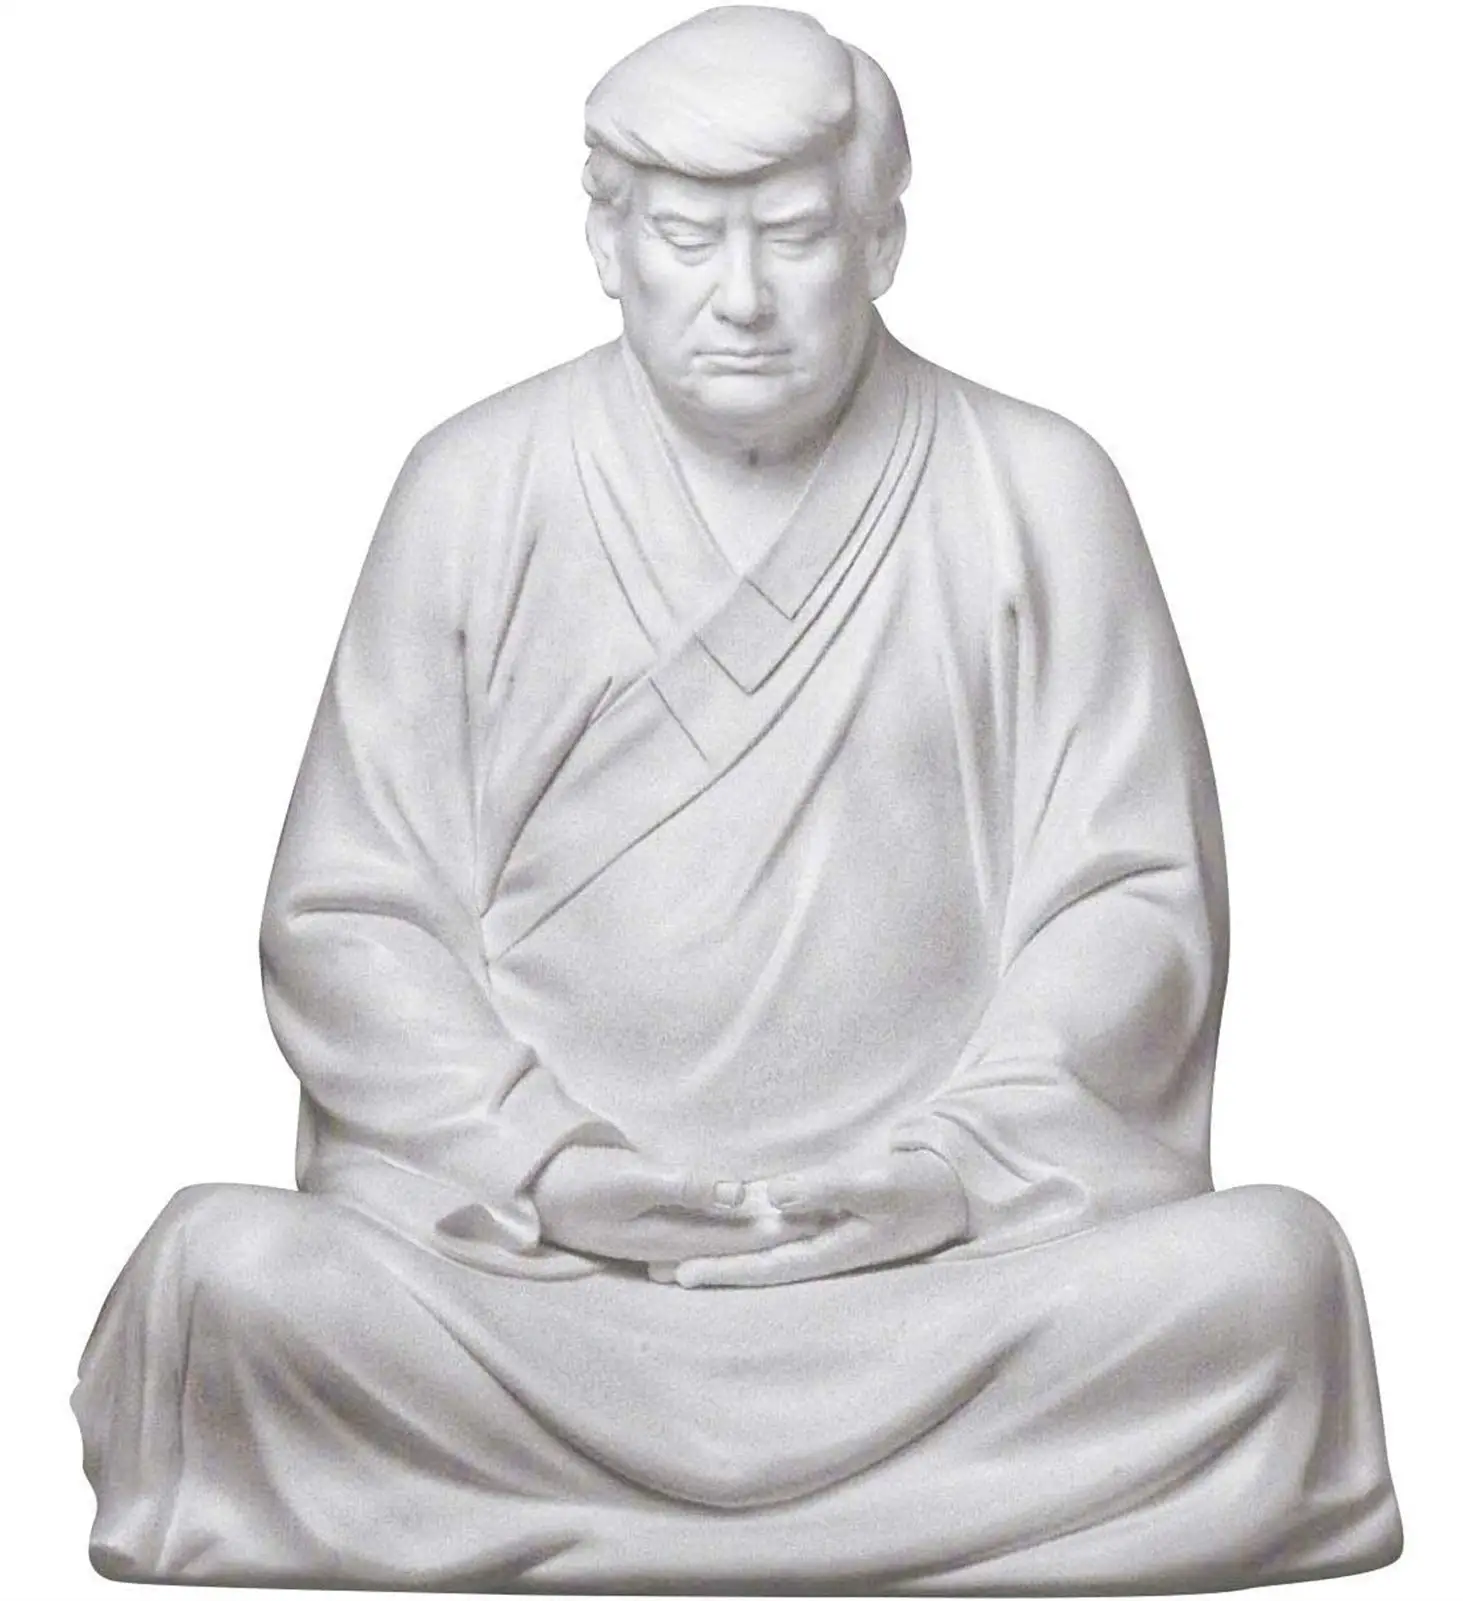 

Buddha statue of Trump Donald Trump Make Your Company Great Again ornaments Dong (know it all) Buddha of the West